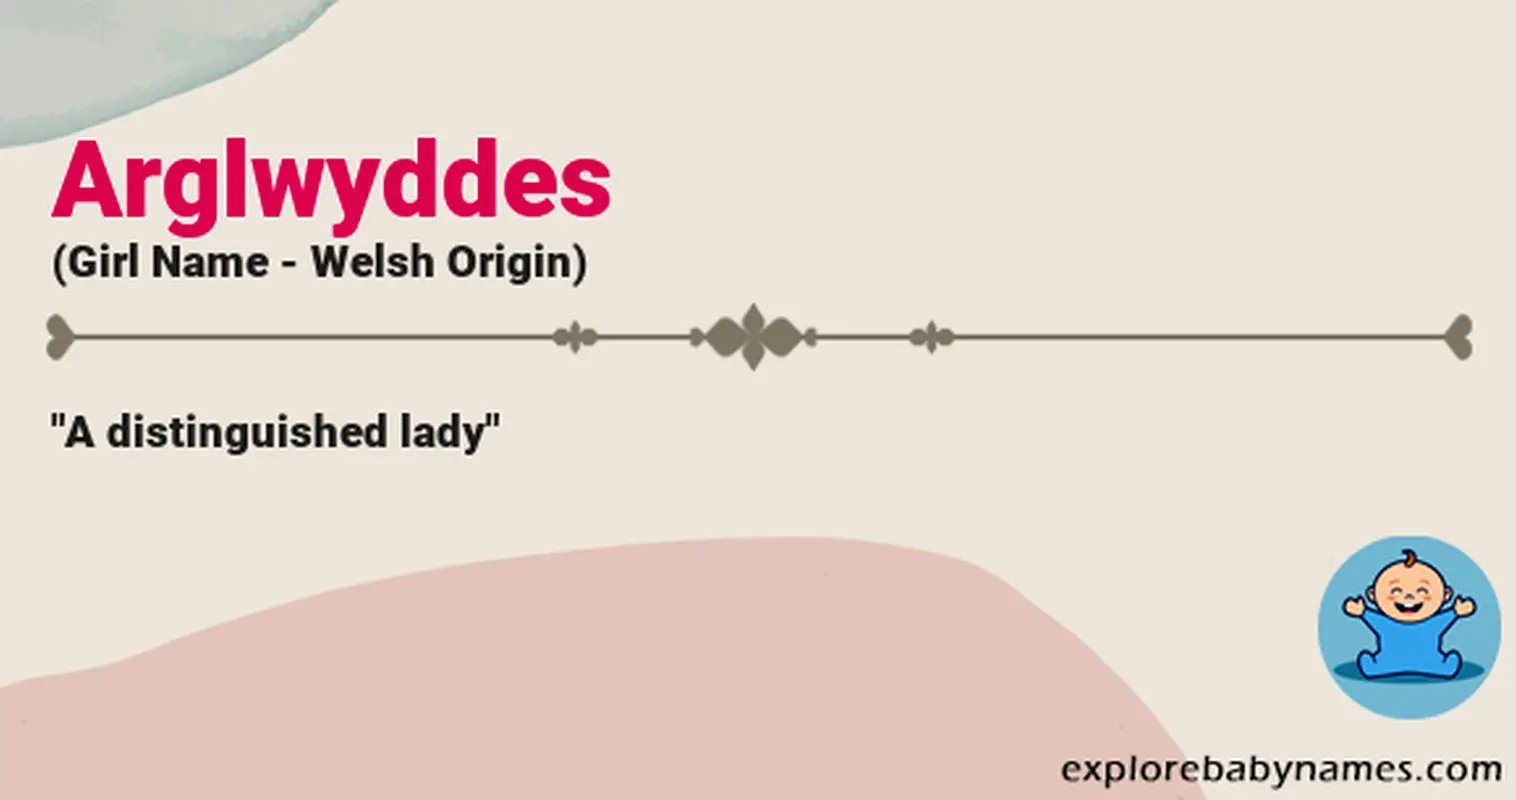 Meaning of Arglwyddes